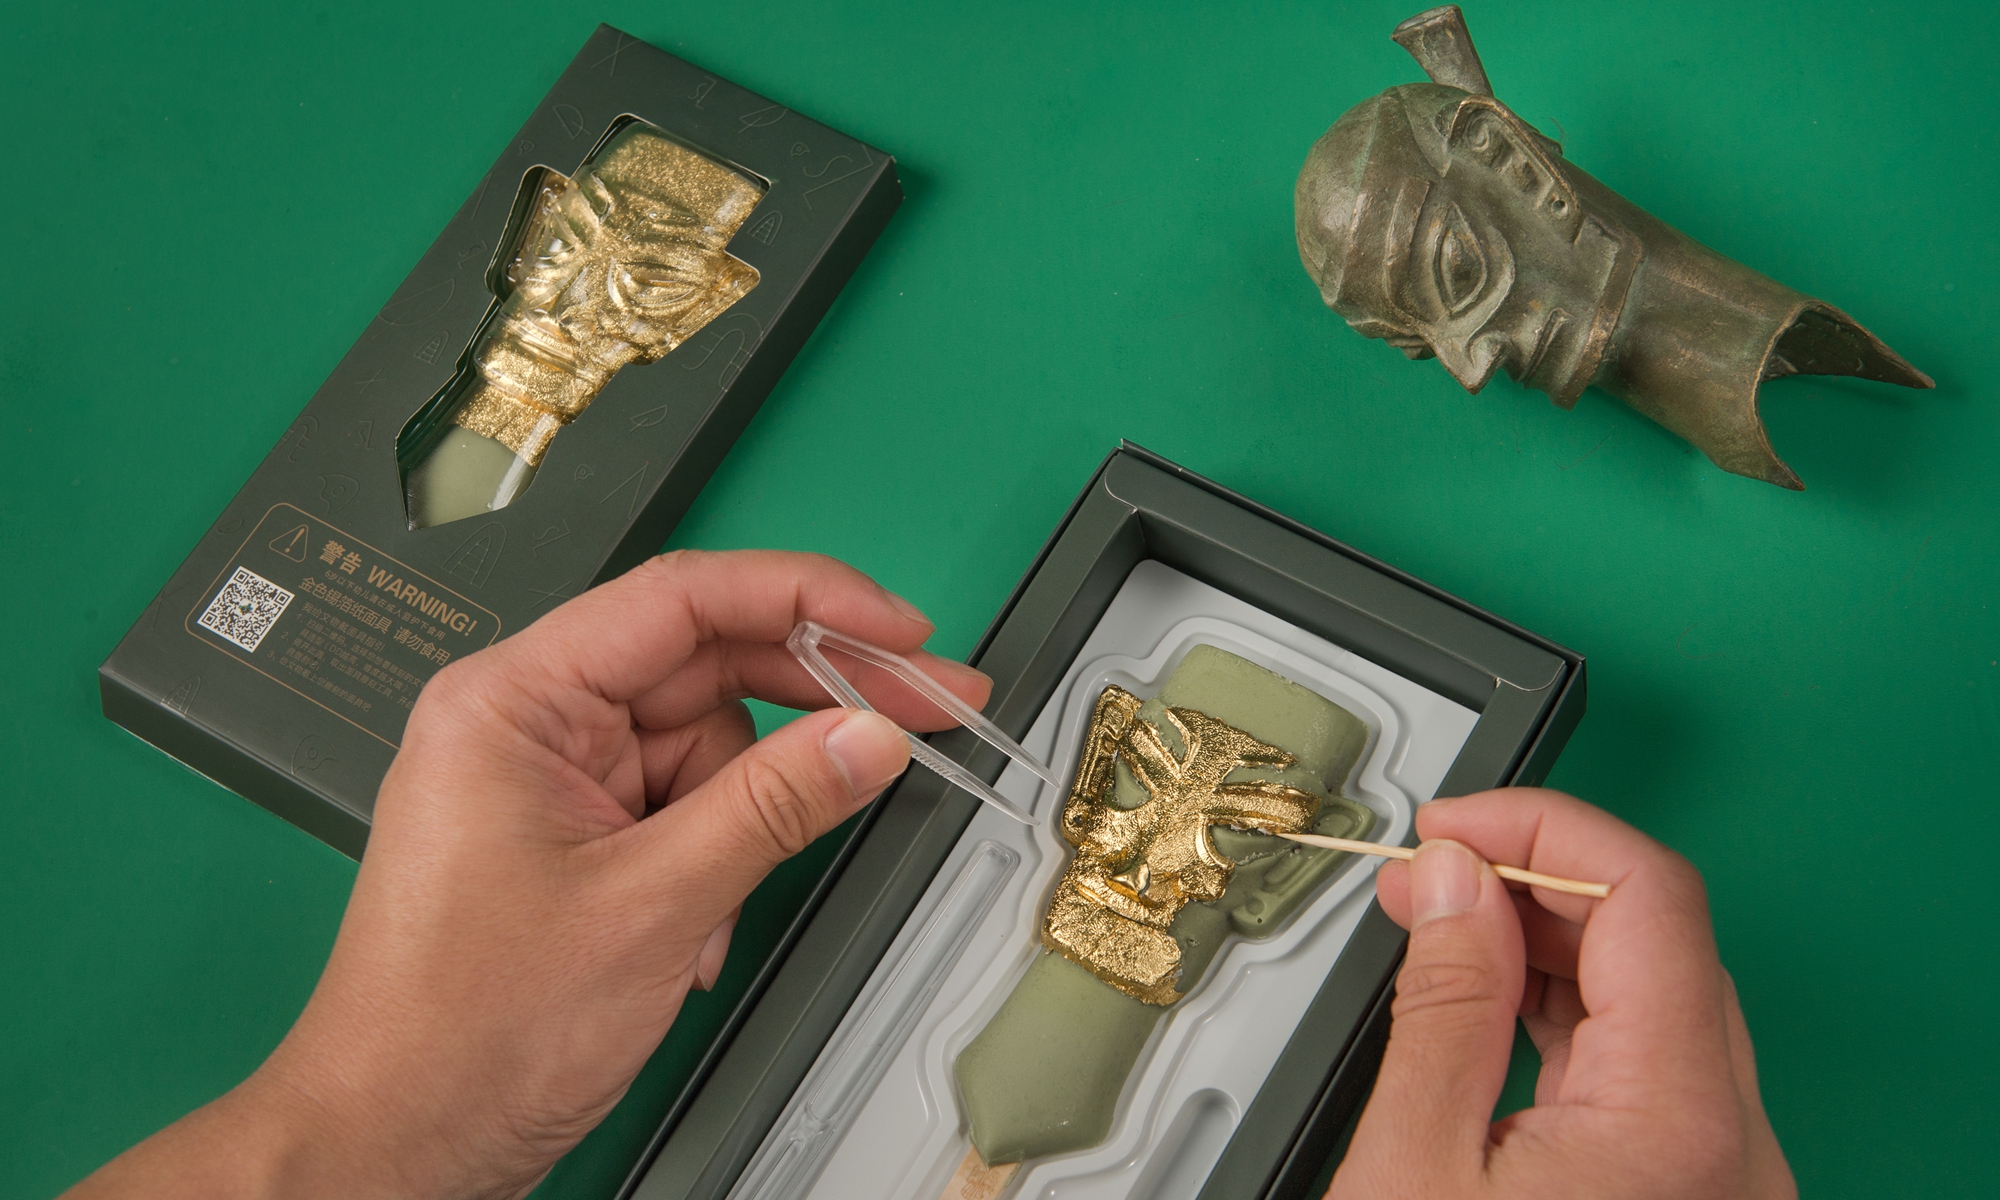 Photo: Souvenirs of cultural relics of the Sanxingdui ruins such as the golden mask and bronze human standing statue